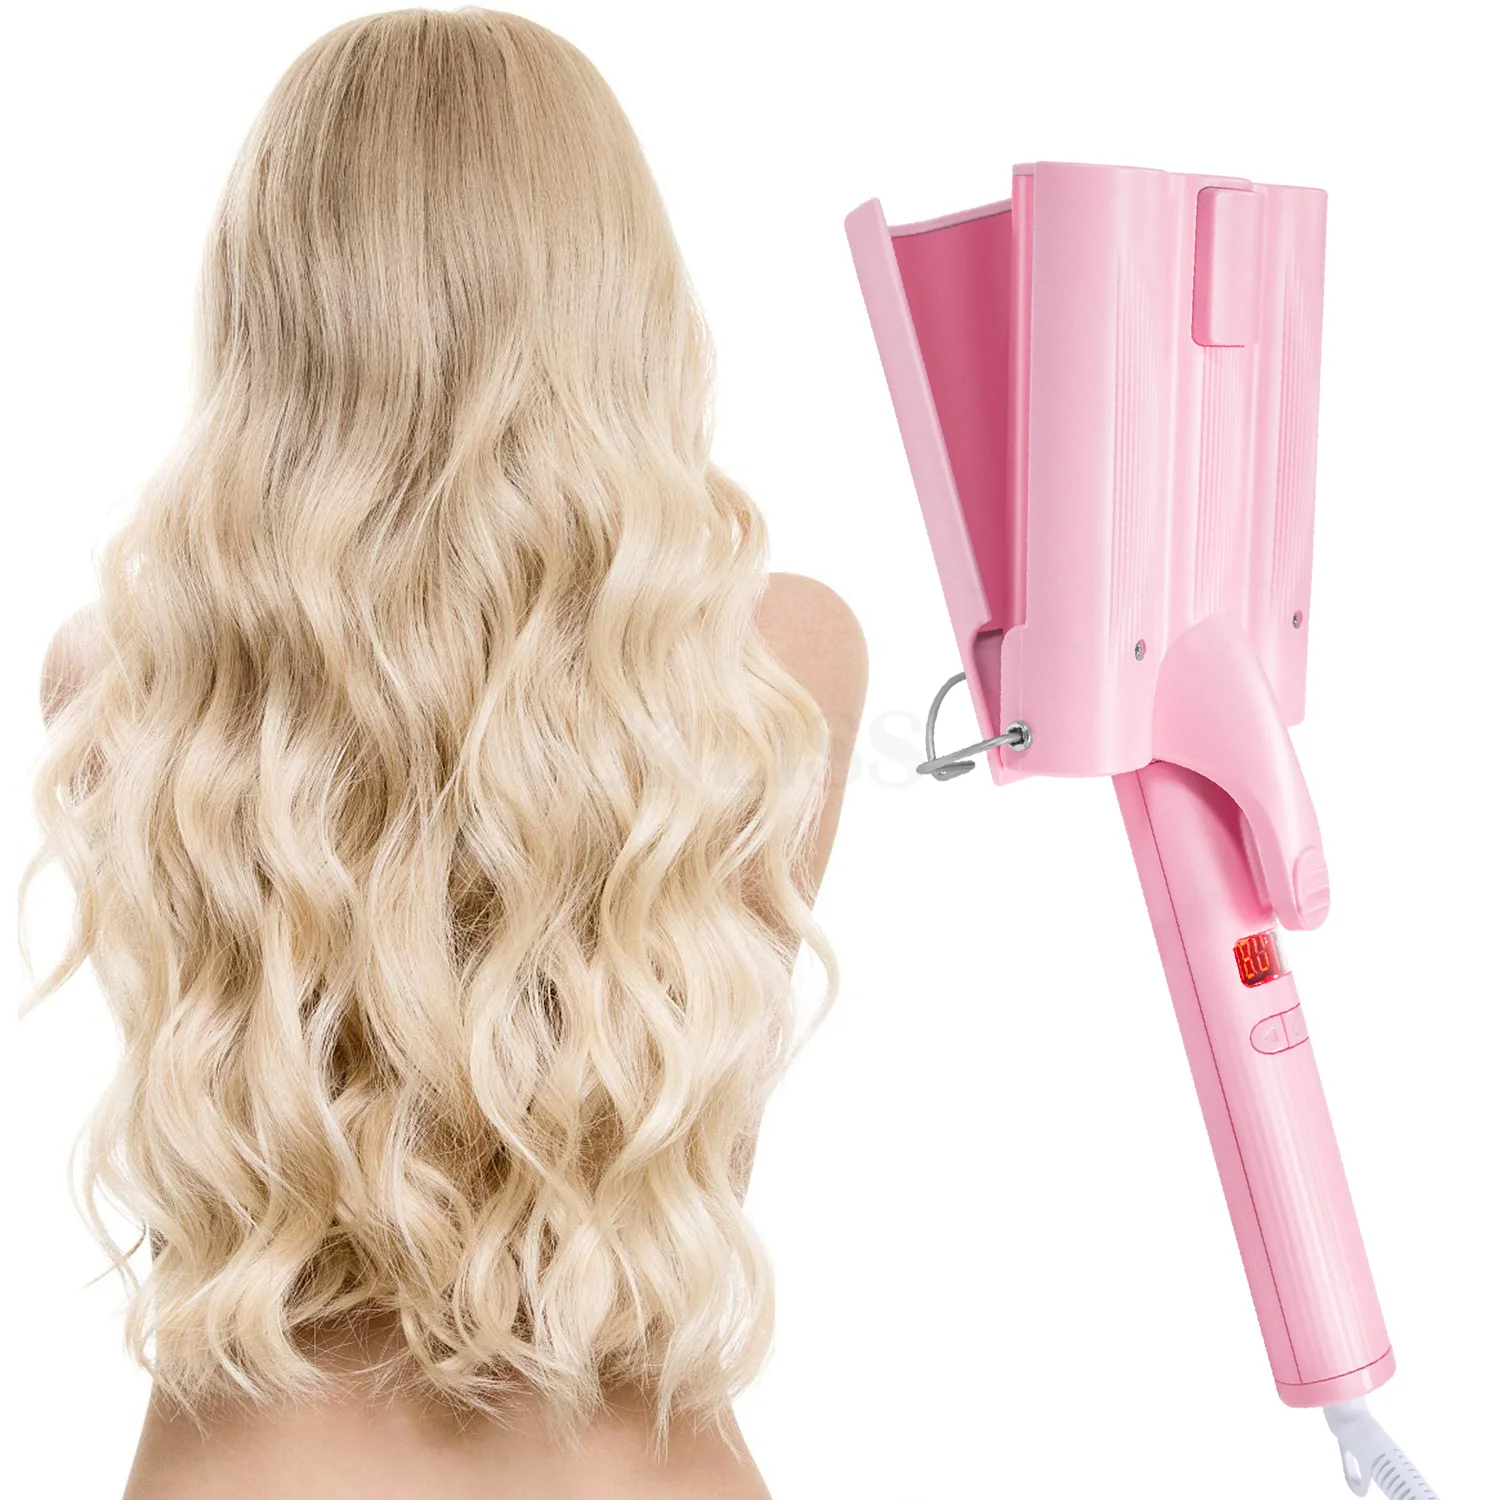 

2019 Factory 3 Barrel Hair Curler With LCD Display Big Wavy hair curler Electric wireless hair curler, Pink